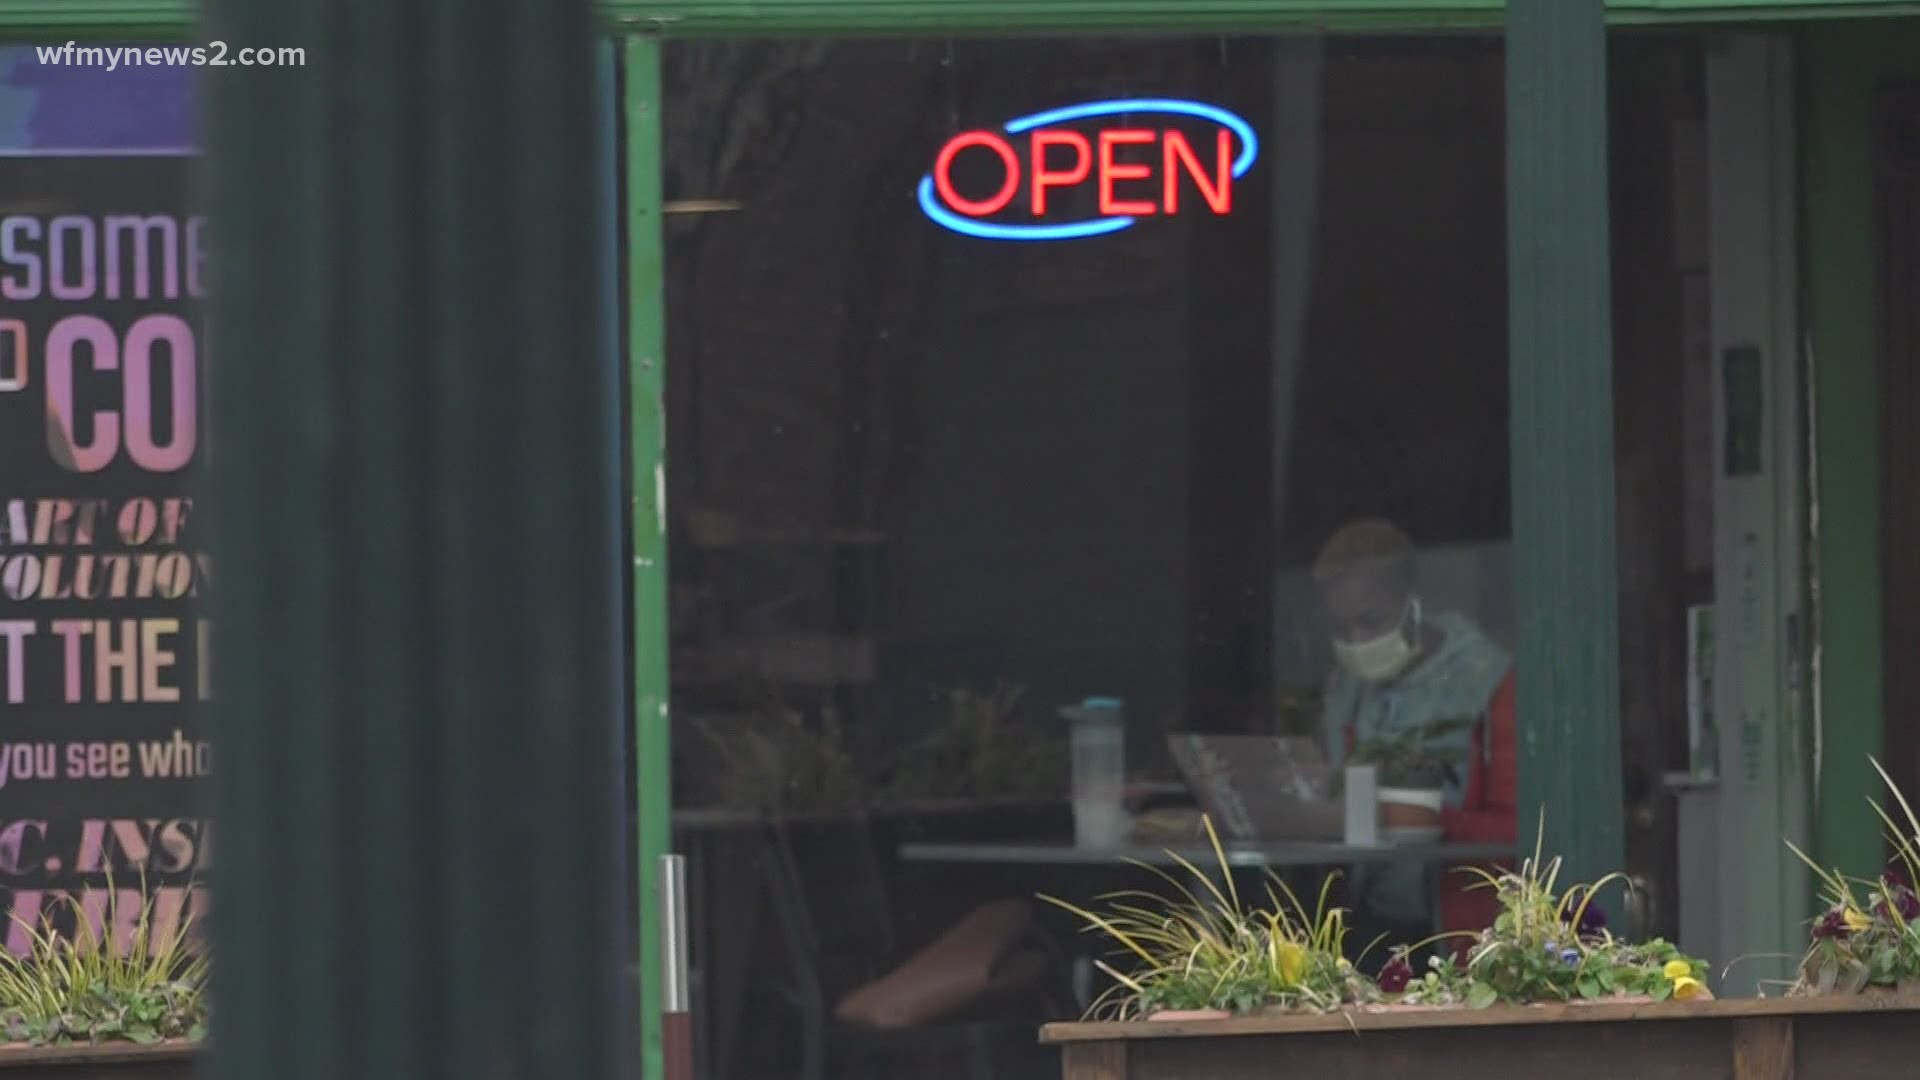 After Governor Cooper eased some COVID-19 restrictions, some businesses saw a needed economic boost over the weekend.